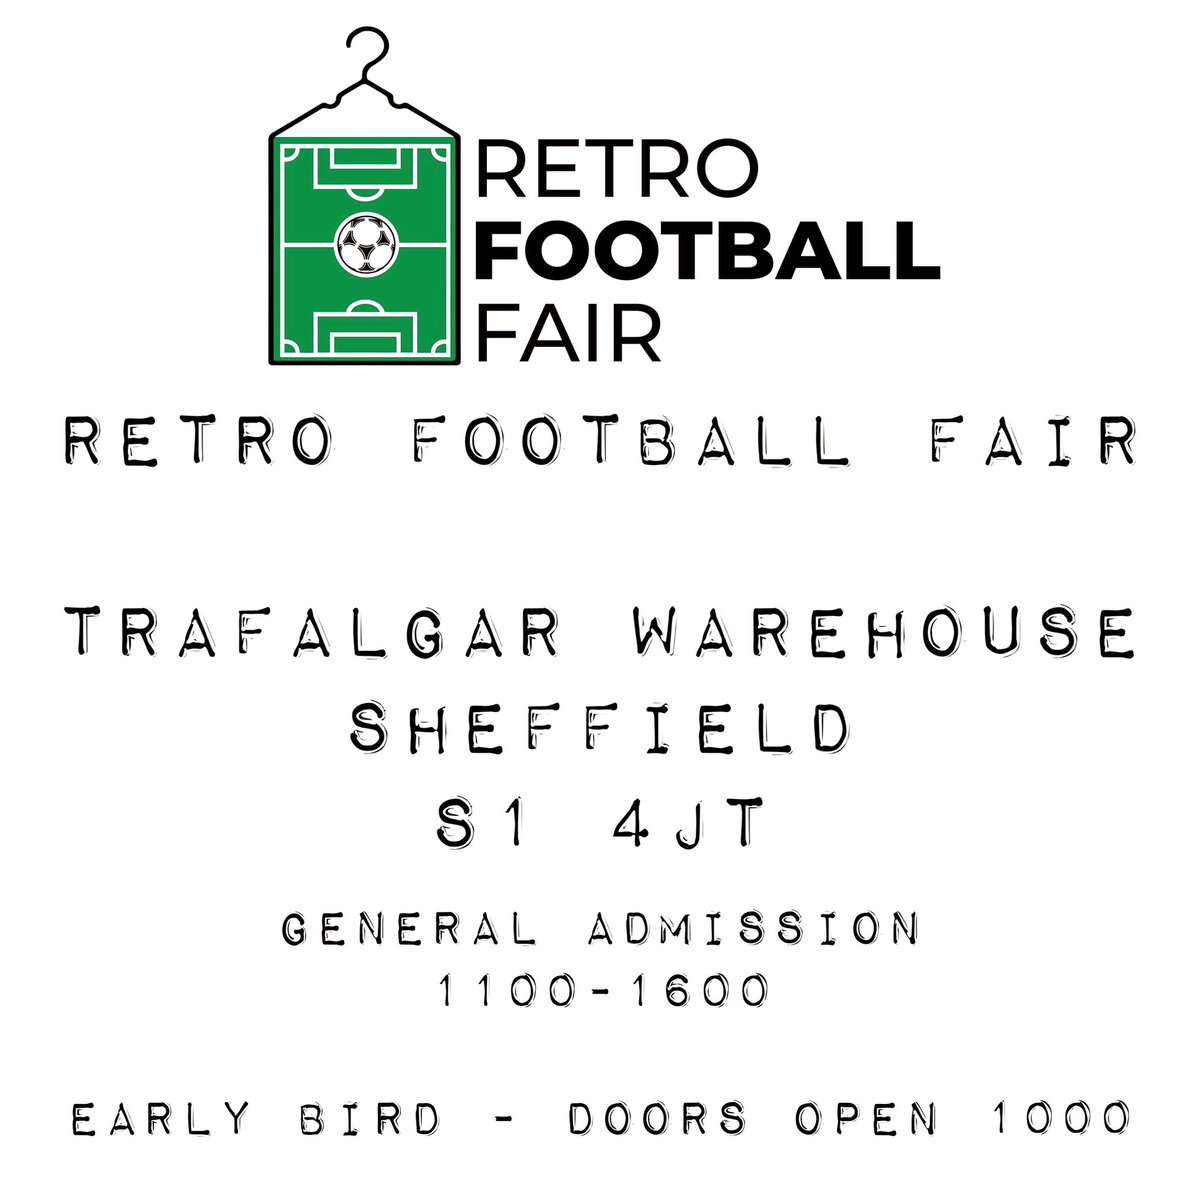 Join Retro Football Shirts and a host of other great sellers tomorrow at Trafalgar Warehouse, Sheffield, S1 4JT. Early Birds - Doors open 1000 - be there earlier for your wristband General admission from 1100. @rff_uk @circa88football @FS101_ #retrofootballfair #rff